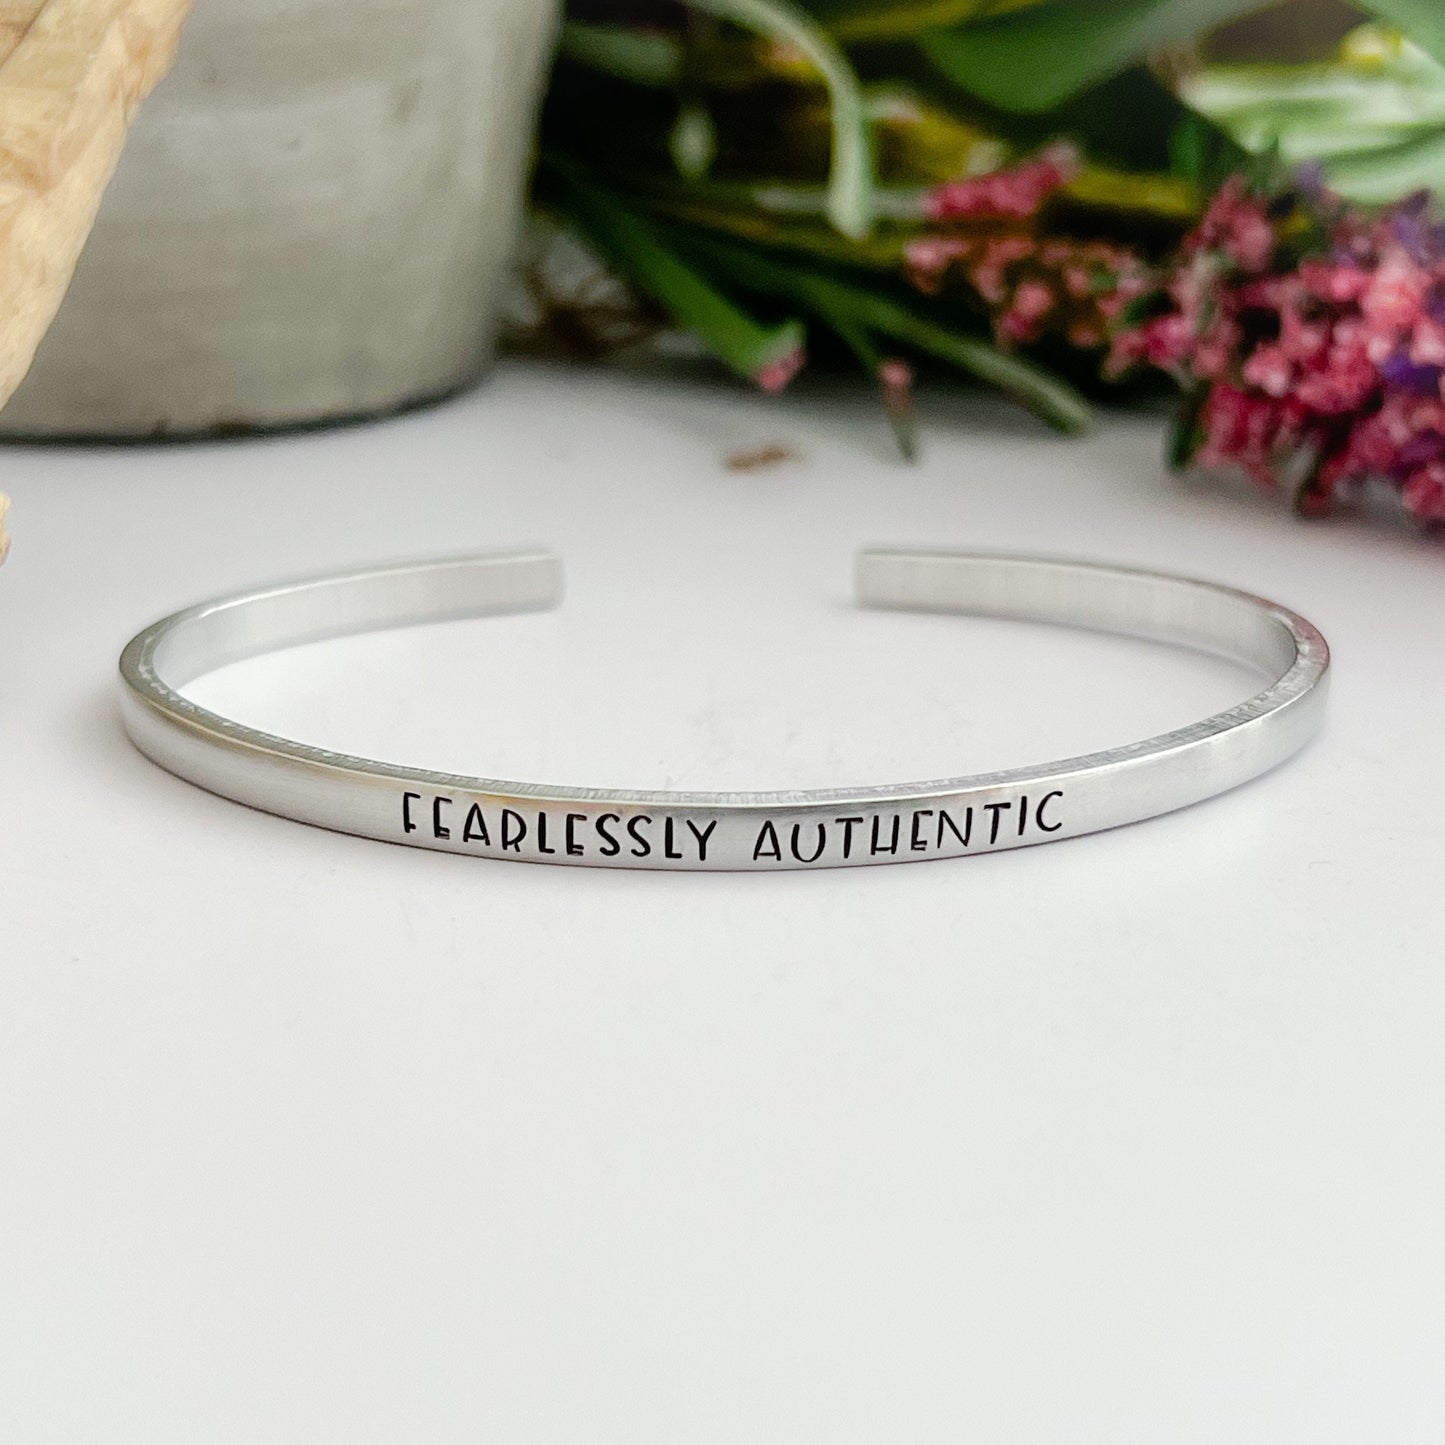 fearlessly authentic--strong woman--inspirational jewelry--birthday gift--friend gift--religious--hand stamped--skinny silver cuff